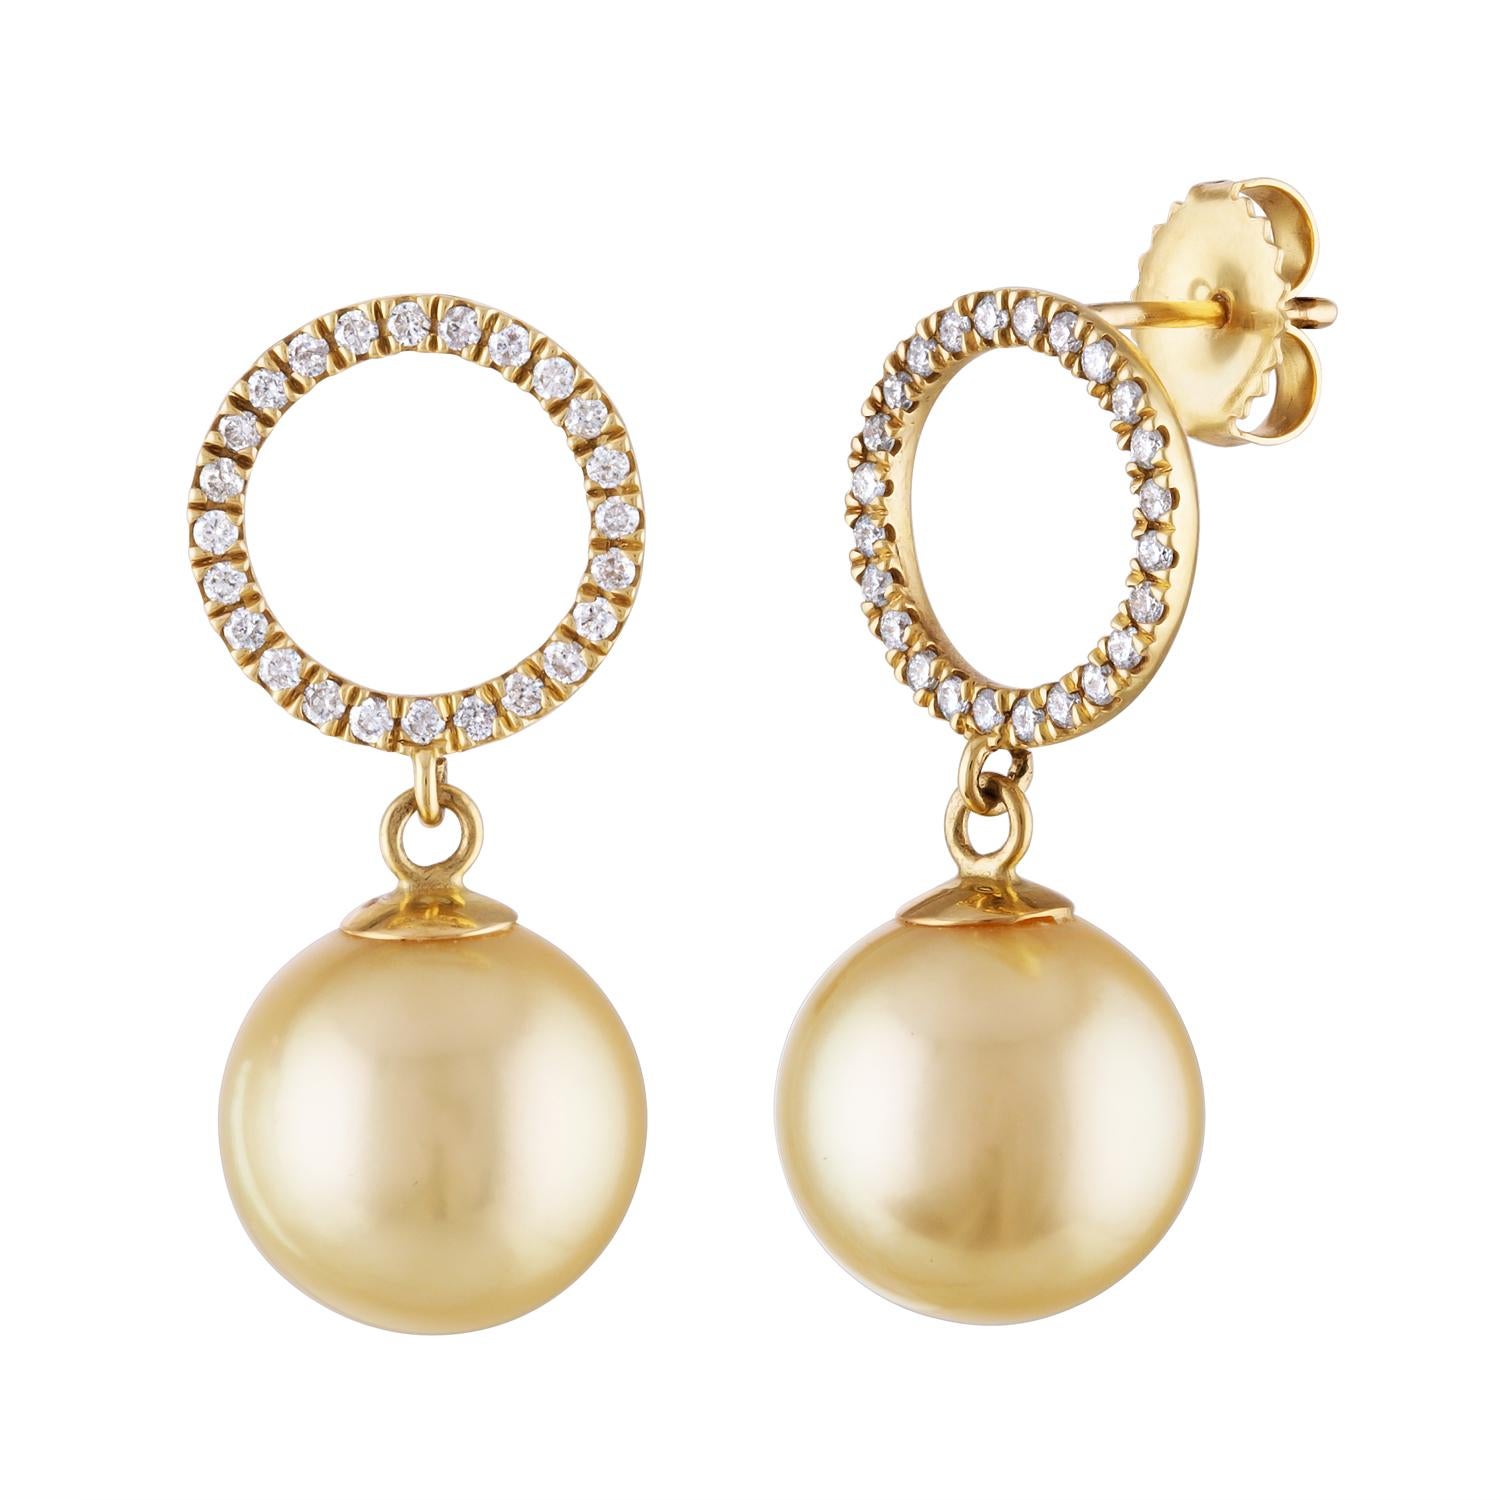 These earrings feature South Sea natural-color golden cultured pearls dangling from a 14 karat yellow gold and diamond halos. These fine quality perfectly round pearls measure 11.8mm. The halos consist of 0.36 carats of diamonds. The earrings are